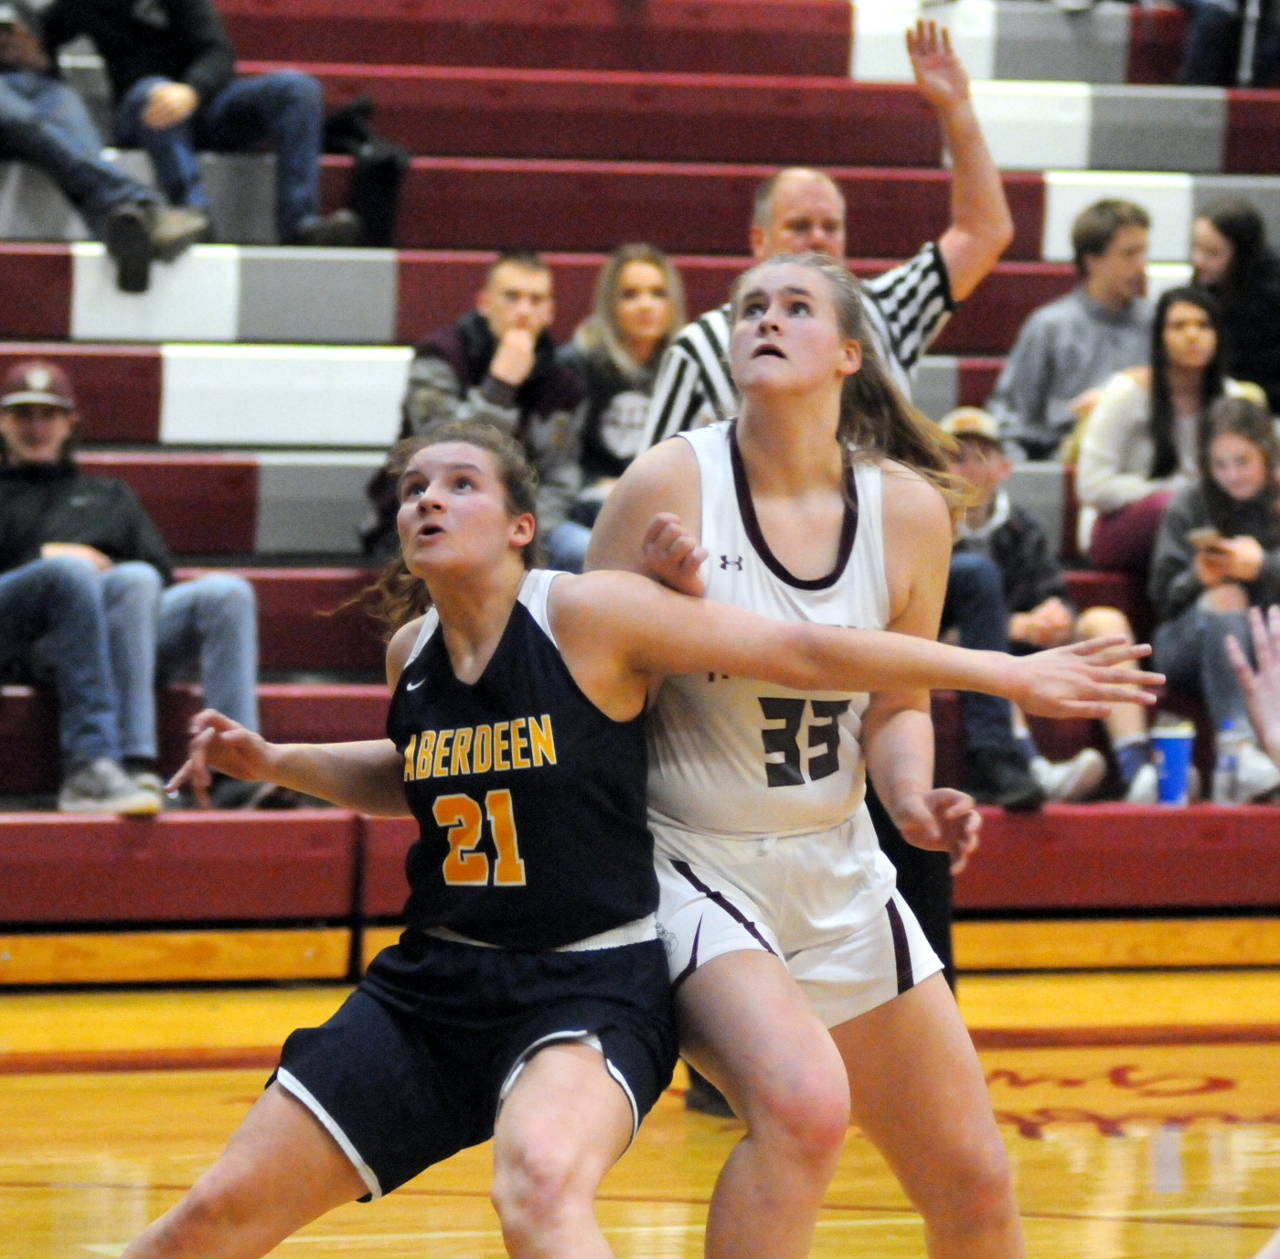 Aberdeen’s Aliyah Tageant (21) and Montesano’s Zoe Hutchings compete for a rebound during Tuesday’s game in Monte. Tageant led Aberdeen with 18 points while Hutchings led Montesano with 19 points. (Ryan Sparks | Grays Harbor News Group)